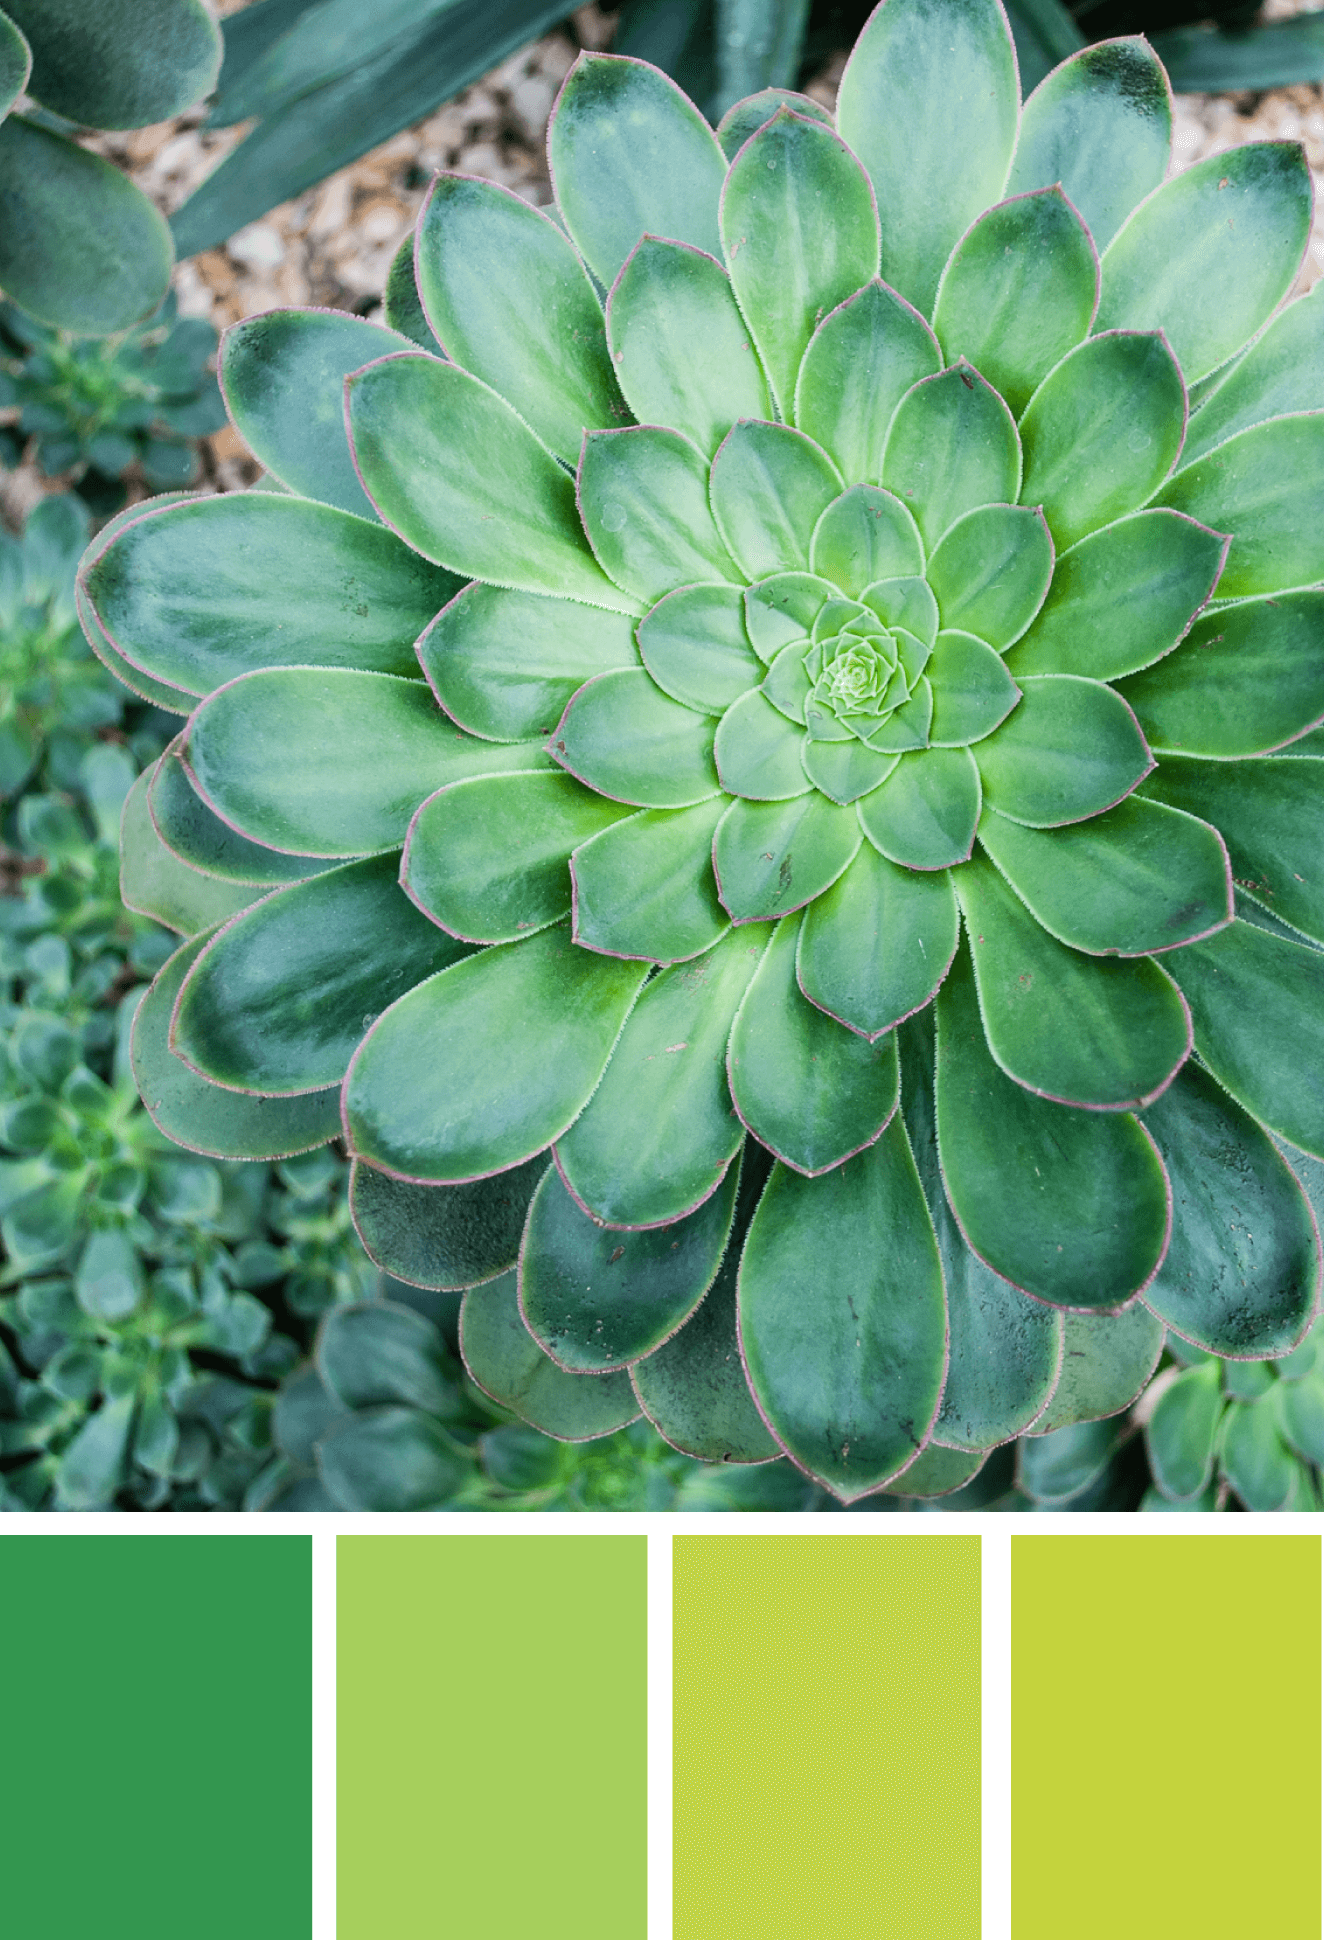 Color palette inspiration: Turning over a new leaf. Try this monochrome green color palette on your paper crafts, stationery, home decor, wreaths, and more #Colorize #ABColorPalette